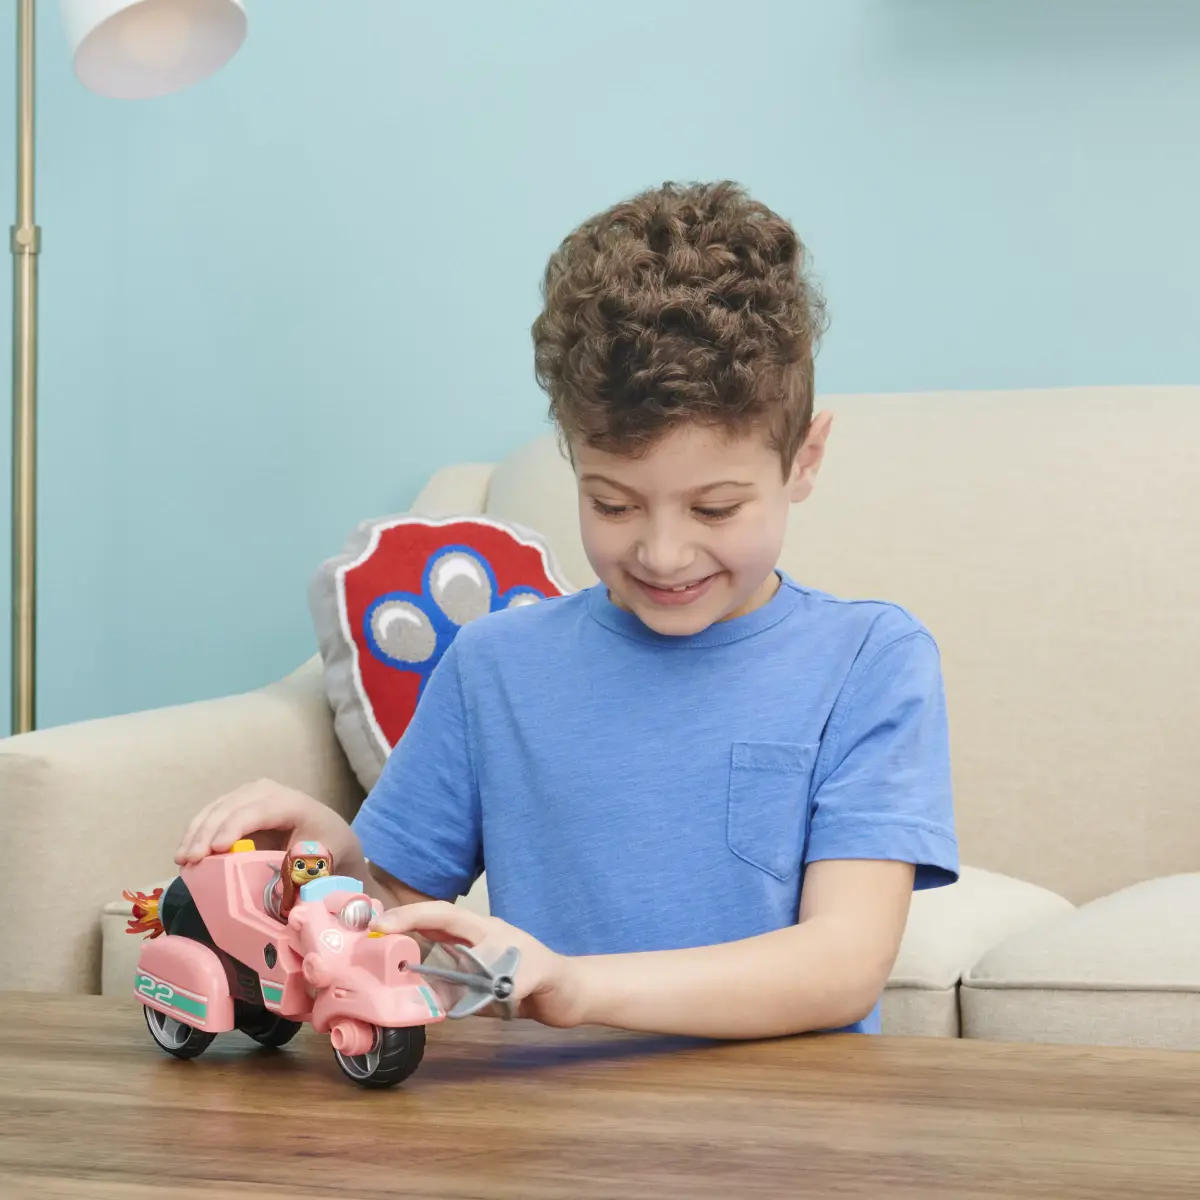 Paw Patrol, Liberty’S Movie Toy Car With Collectible Action Figure, Kids Toys For Ages 3 And Up